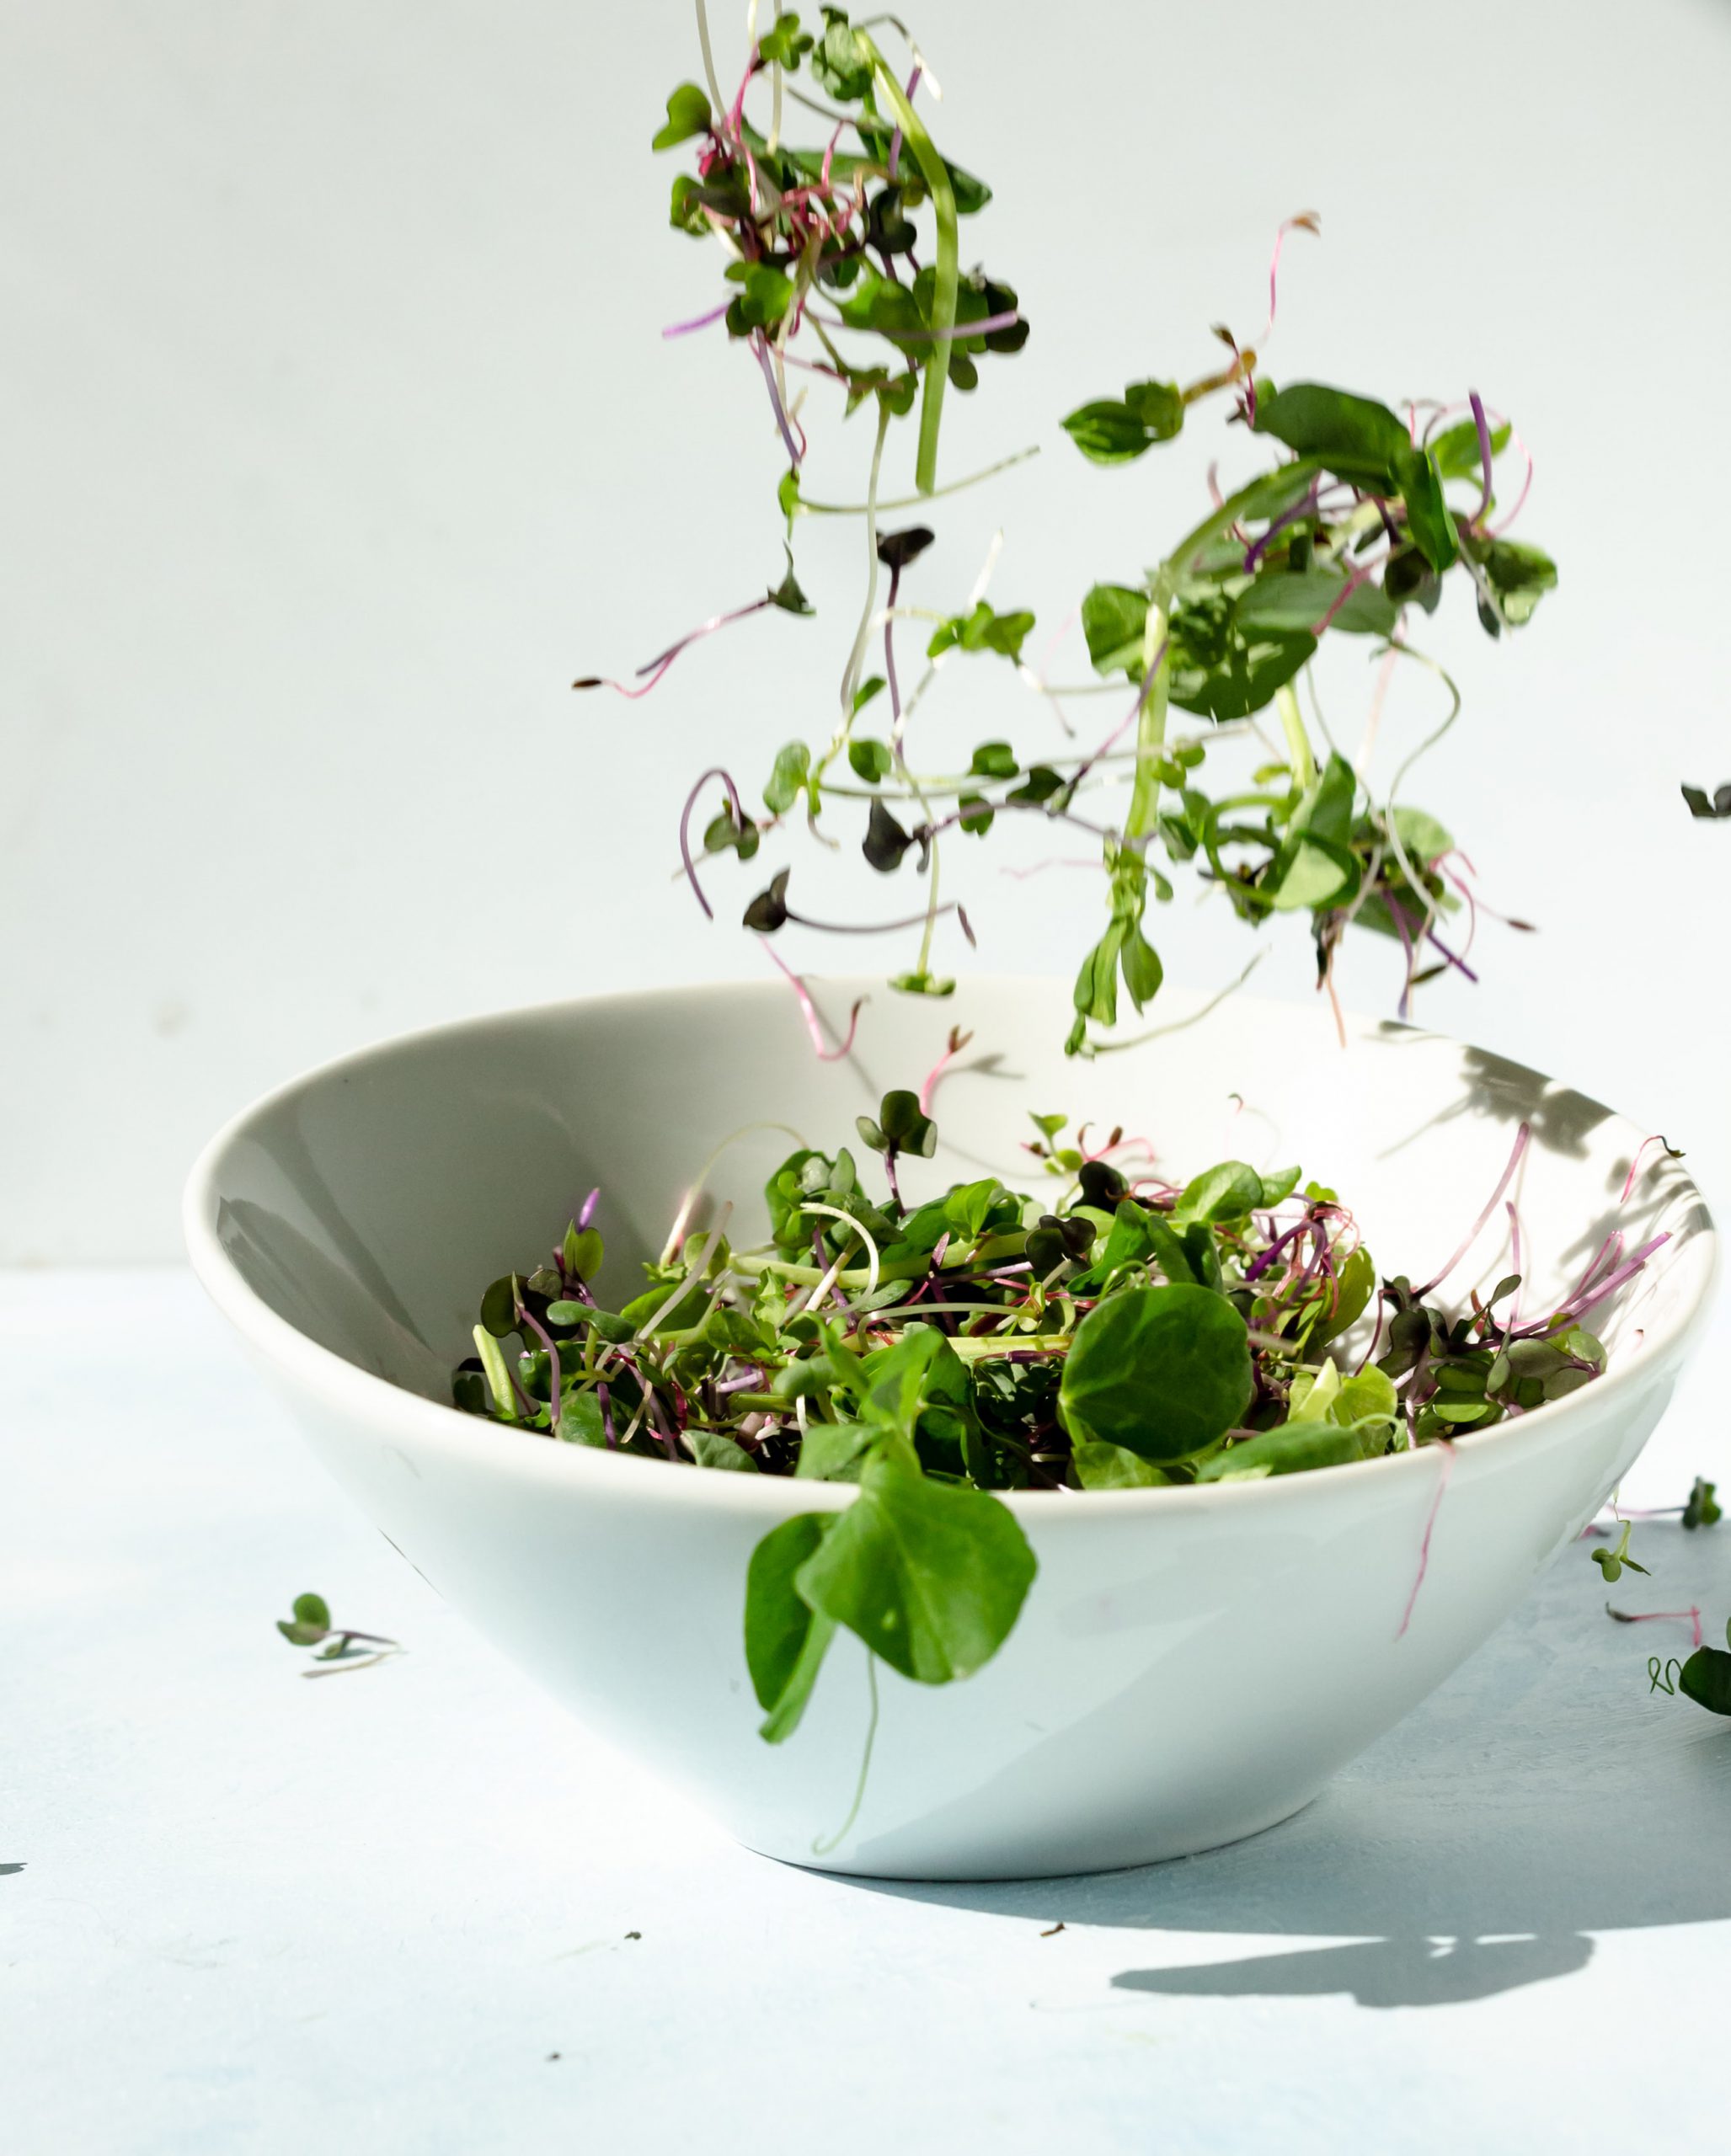 microgreens tossed in a white bowl